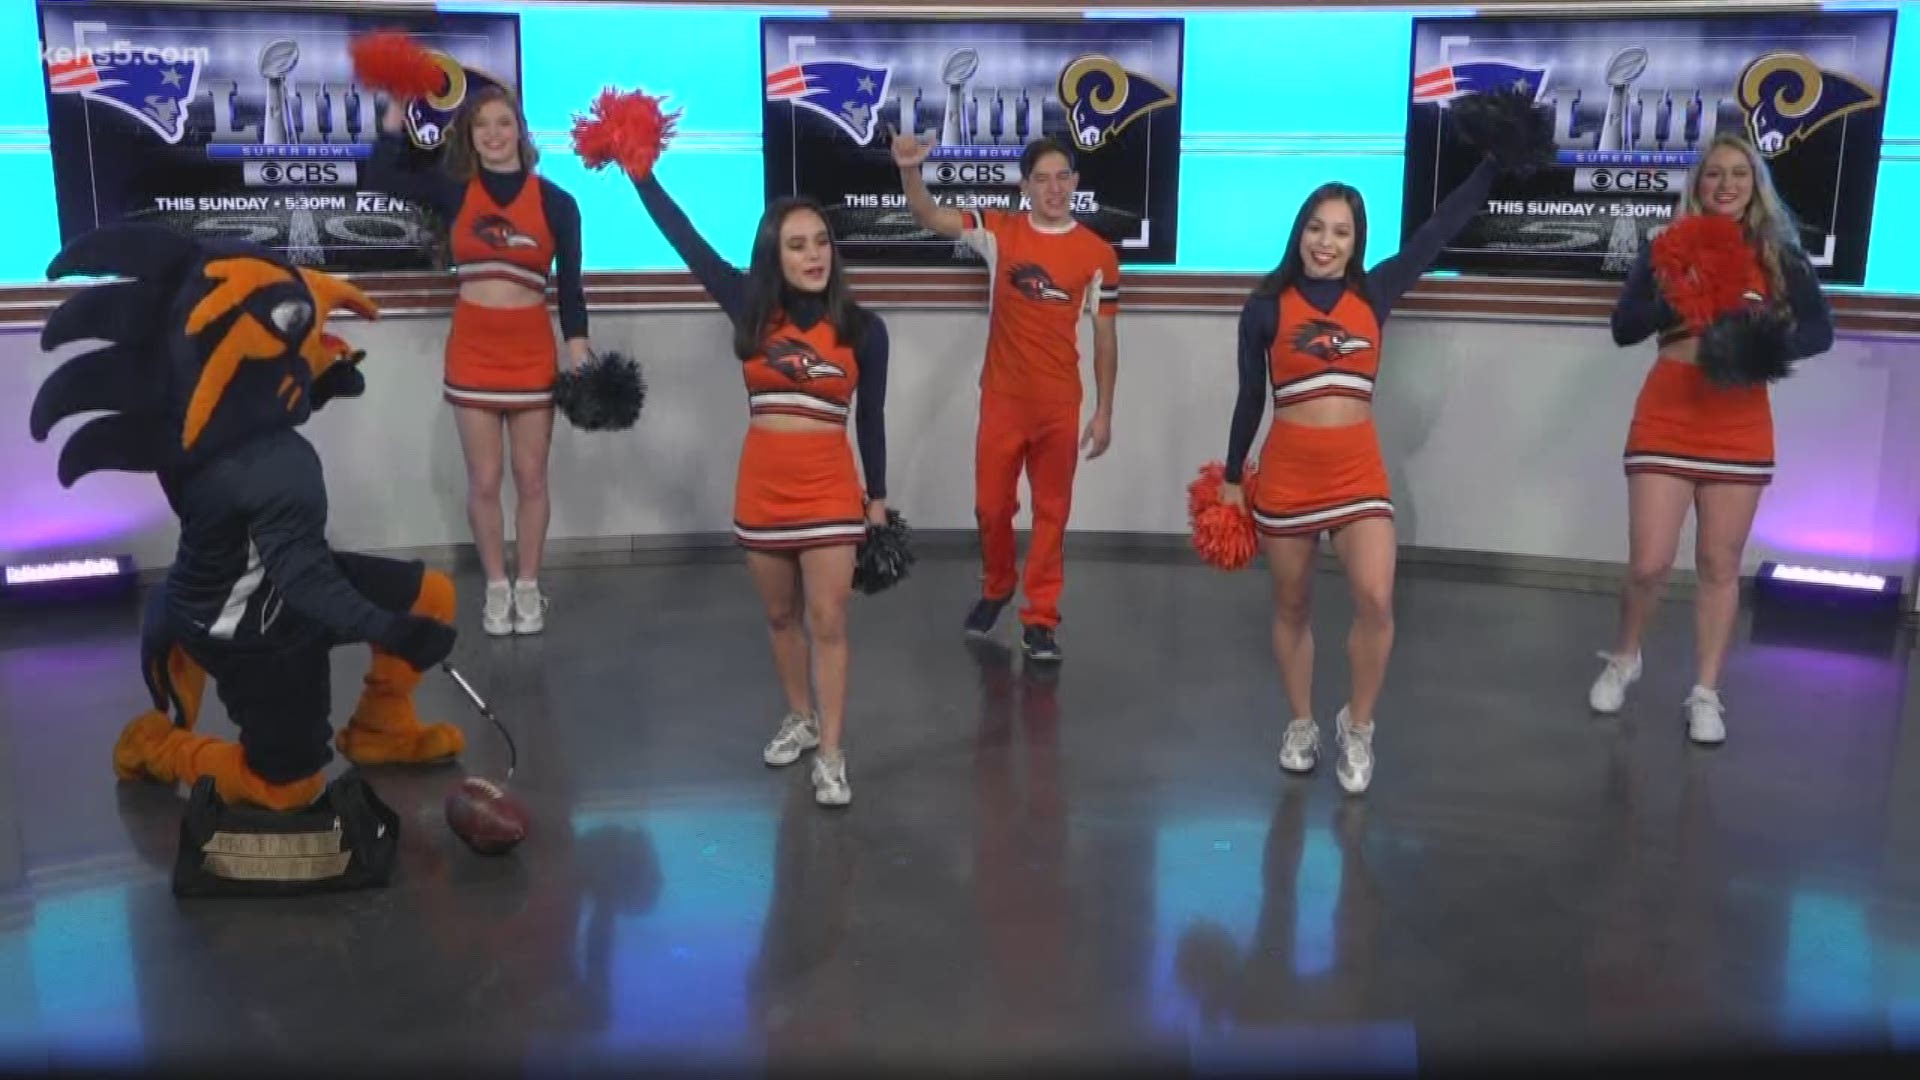 KENS 5 had a cheer section in the studio on "Super Bowl Saturday." The cheer team from UTSA and their mascot Rowdy the Roadrunner were on hand to pump us up before Sunday's big game.